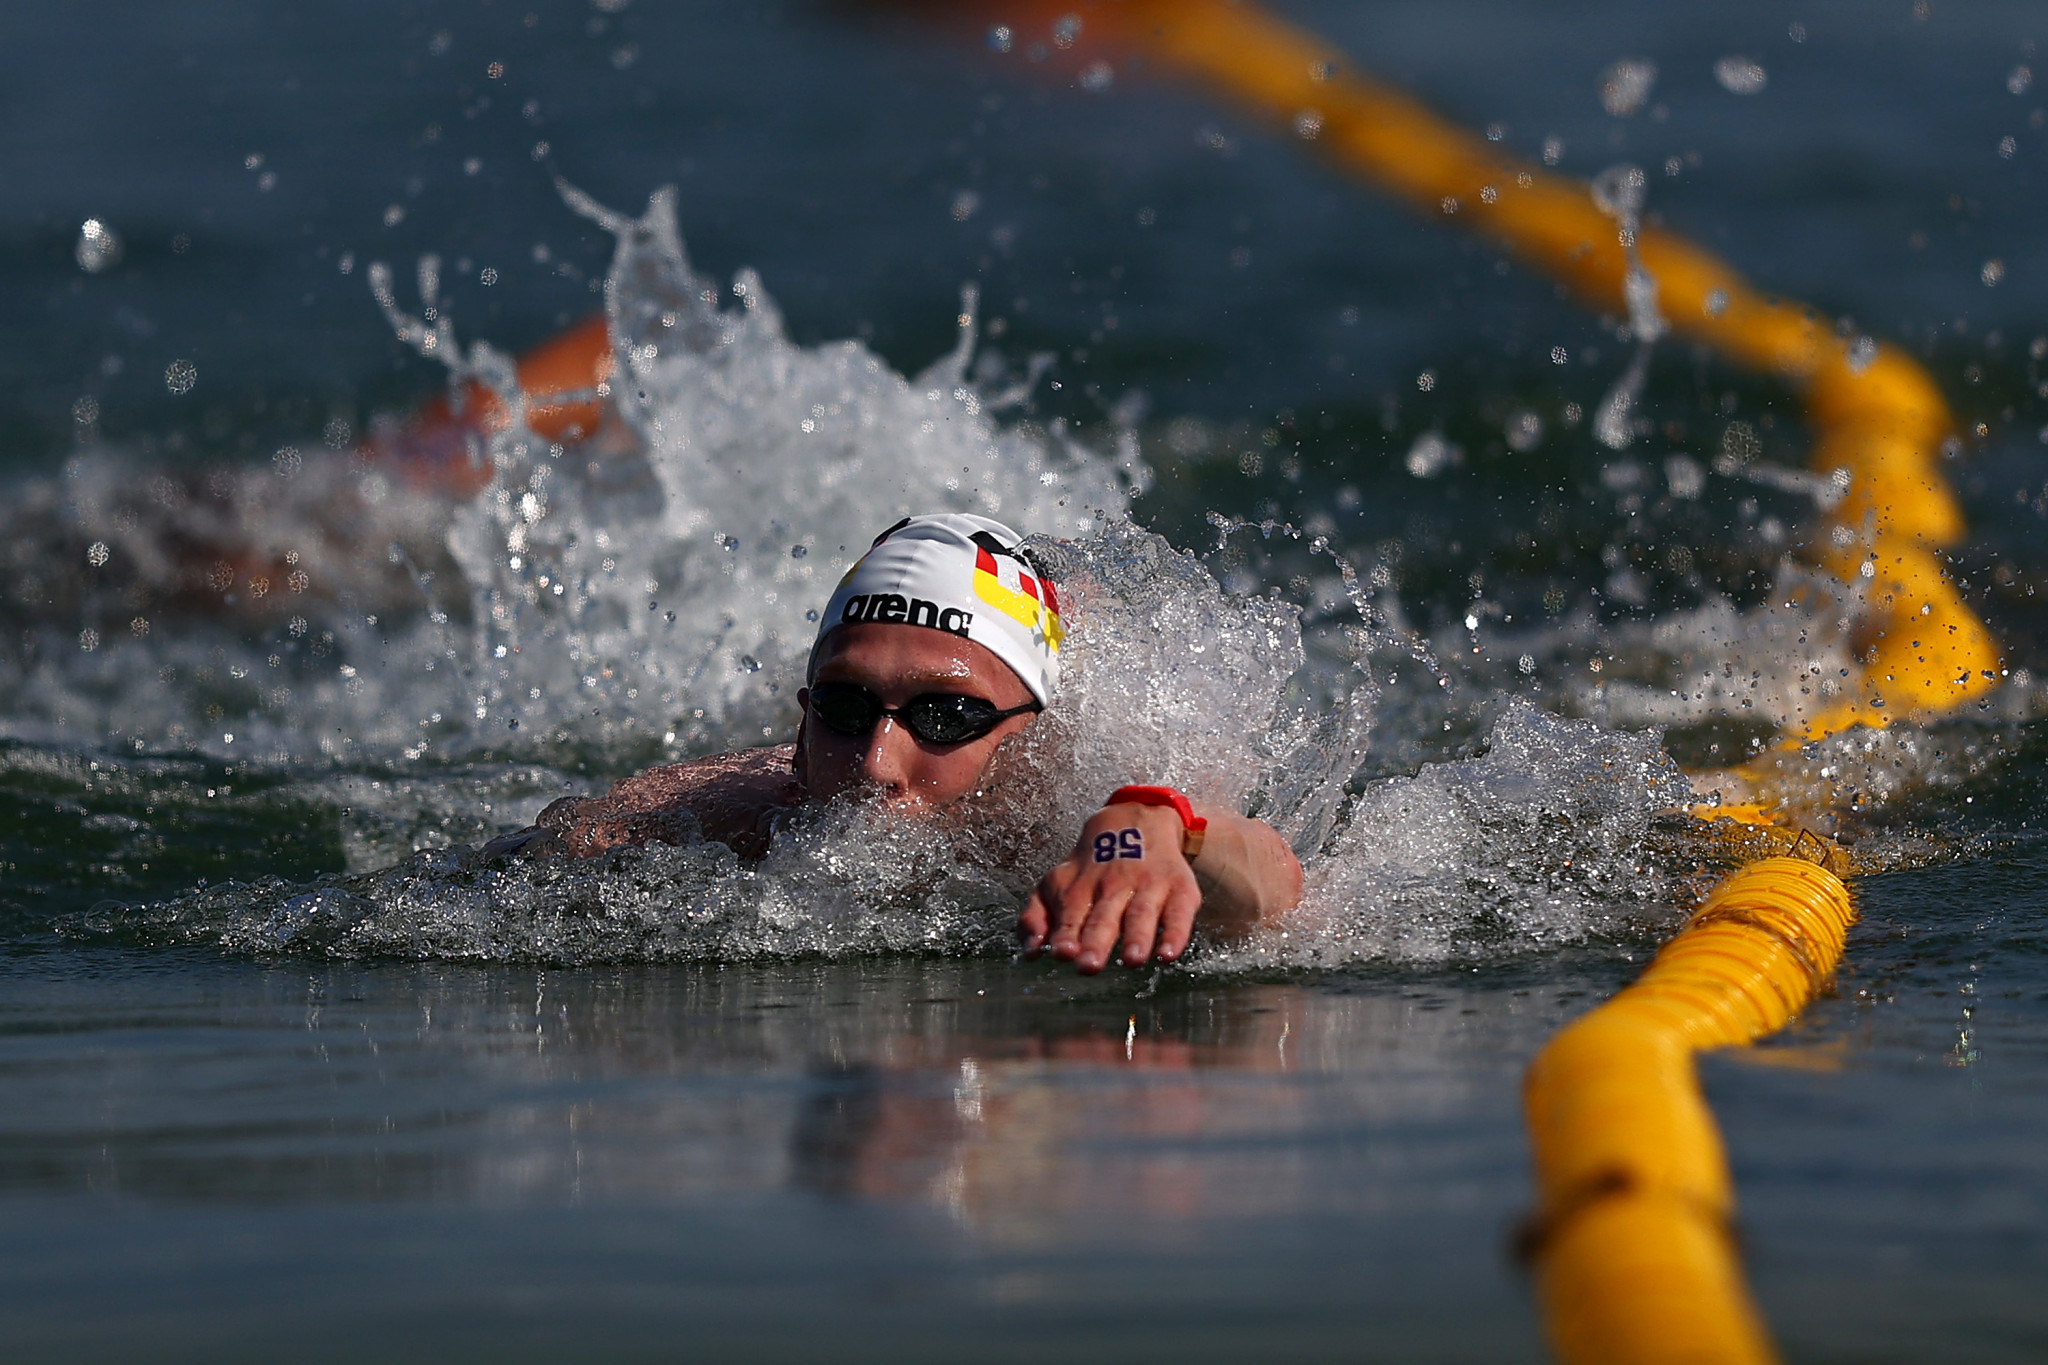 Florian Wellbrock of Germany claimed victory in the men's 5km open water swimming final  ©Getty Images